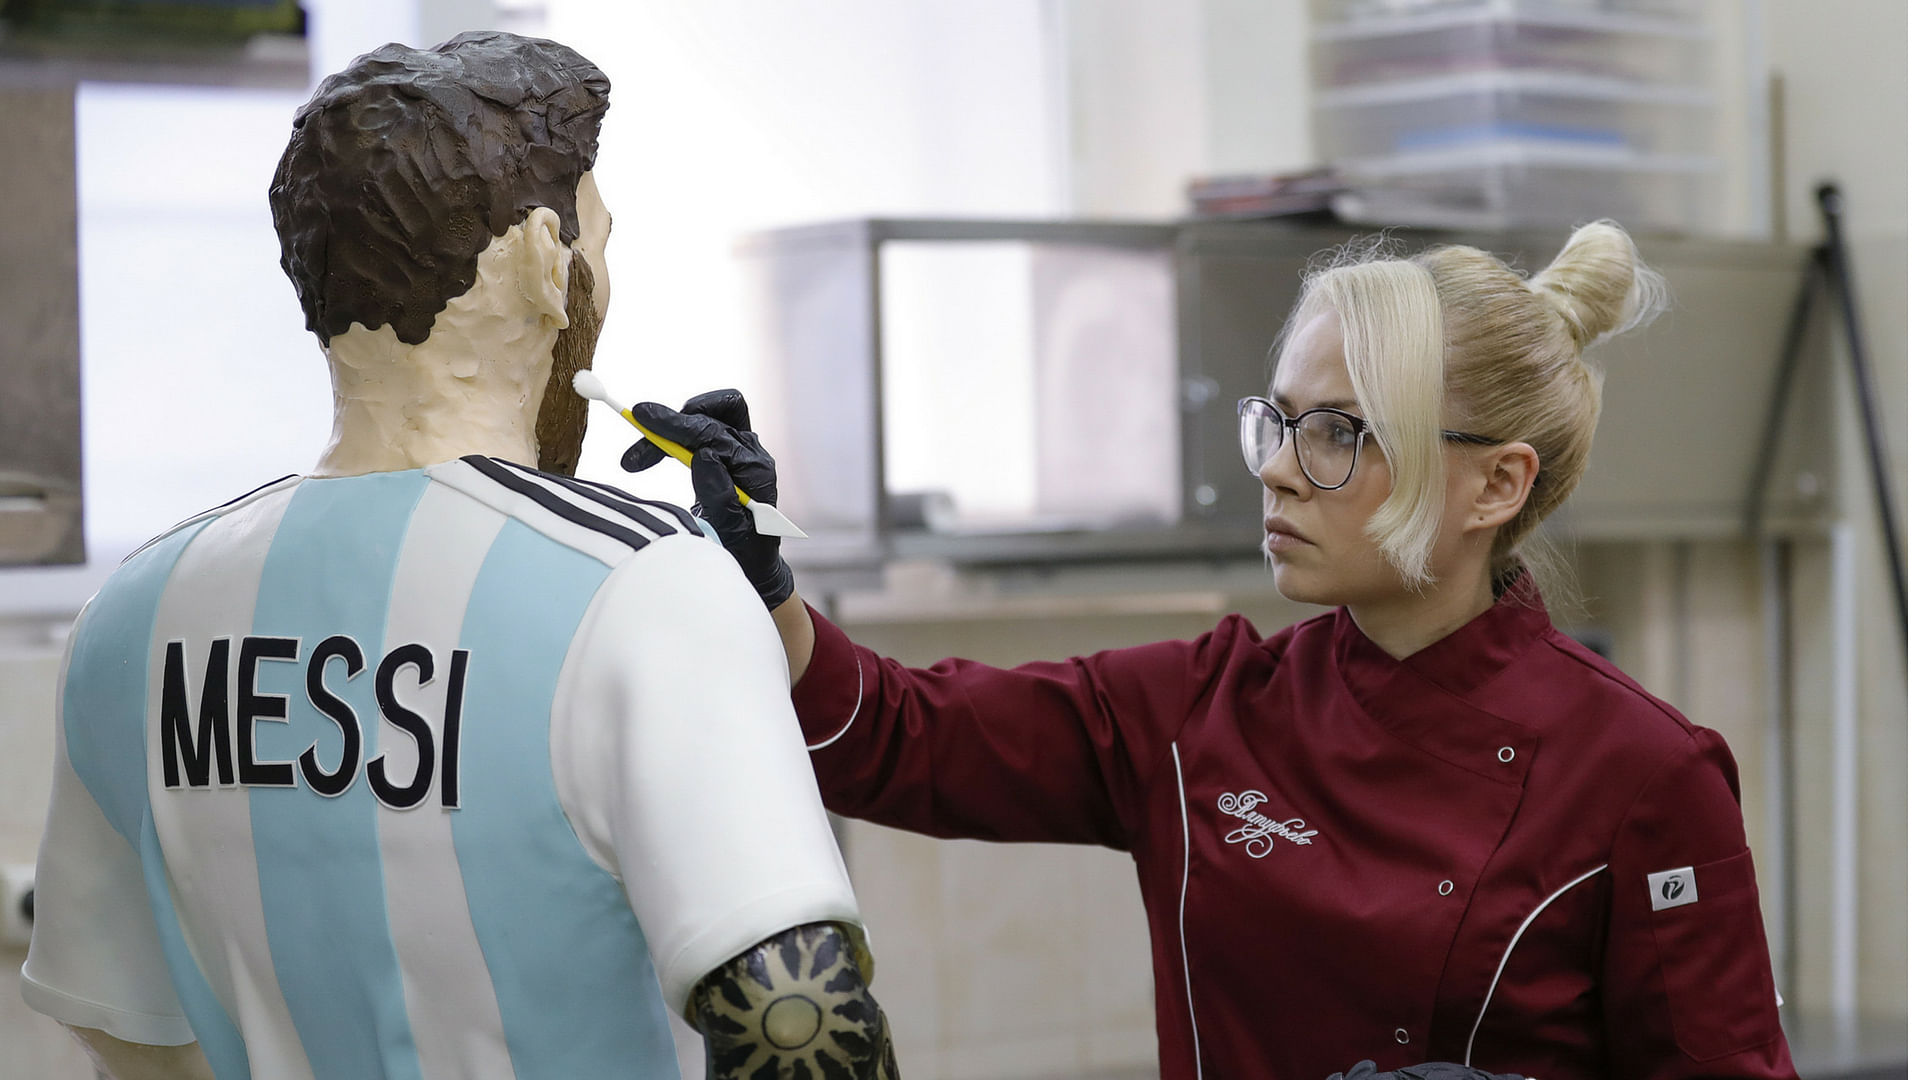 A life-size chocolate sculpture of Lionel Messi